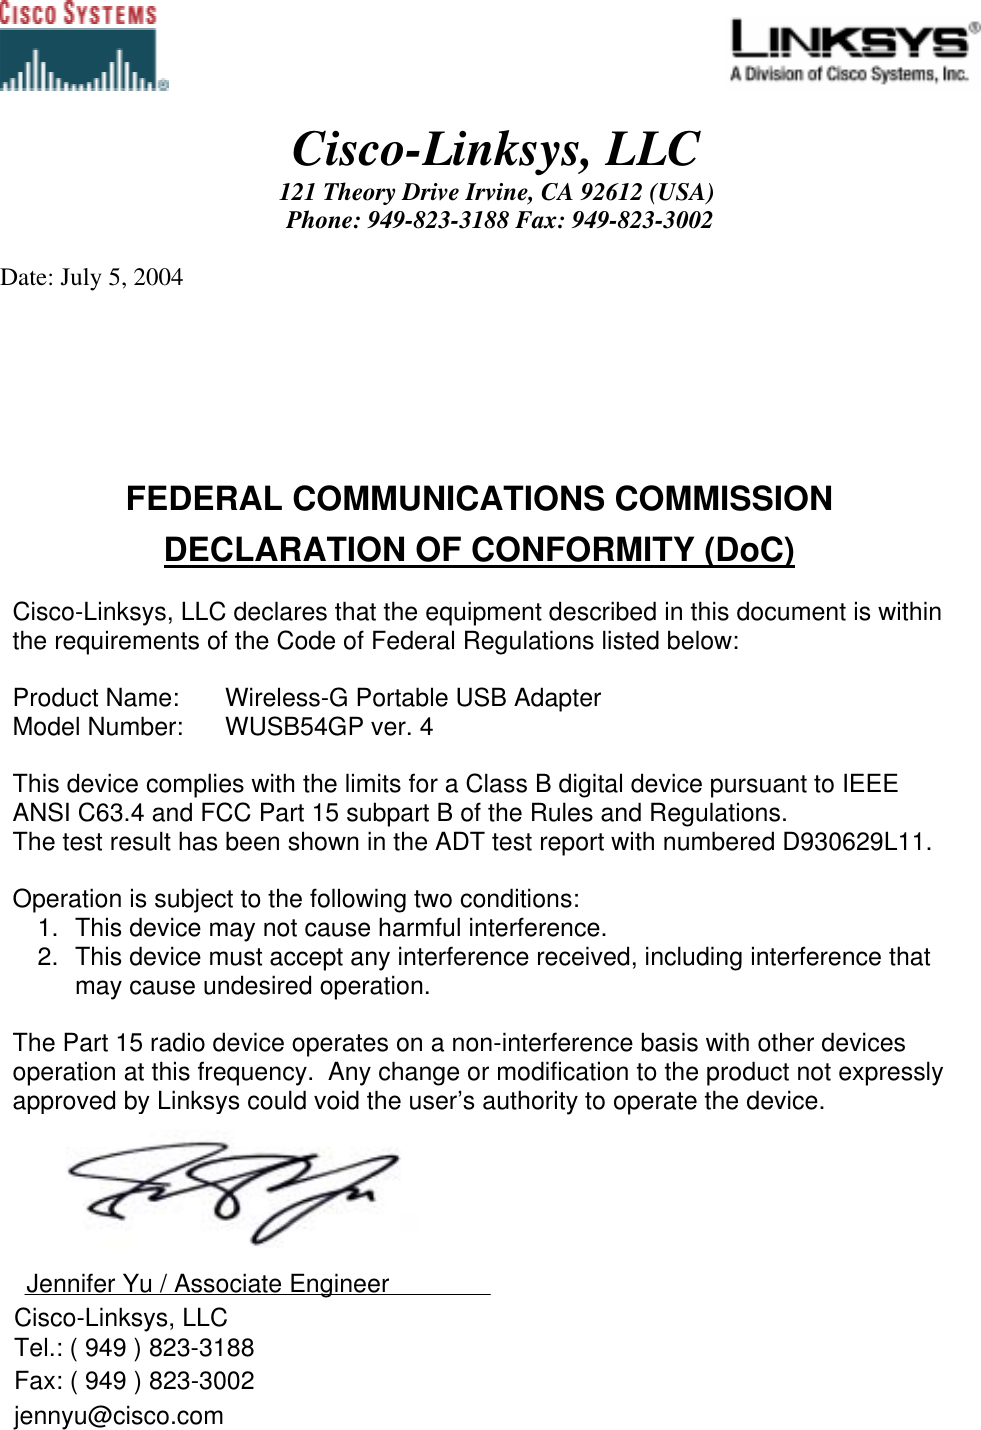                                                                                             Cisco-Linksys, LLC 121 Theory Drive Irvine, CA 92612 (USA)  Phone: 949-823-3188 Fax: 949-823-3002  Date: July 5, 2004 FEDERAL COMMUNICATIONS COMMISSION DECLARATION OF CONFORMITY (DoC)  Cisco-Linksys, LLC declares that the equipment described in this document is within the requirements of the Code of Federal Regulations listed below:  Product Name:   Wireless-G Portable USB Adapter Model Number:   WUSB54GP ver. 4  This device complies with the limits for a Class B digital device pursuant to IEEE ANSI C63.4 and FCC Part 15 subpart B of the Rules and Regulations.  The test result has been shown in the ADT test report with numbered D930629L11.   Operation is subject to the following two conditions: 1.  This device may not cause harmful interference. 2.  This device must accept any interference received, including interference that may cause undesired operation.   The Part 15 radio device operates on a non-interference basis with other devices operation at this frequency.  Any change or modification to the product not expressly approved by Linksys could void the user’s authority to operate the device.    Jennifer Yu / Associate Engineer    Cisco-Linksys, LLC   Tel.: ( 949 ) 823-3188   Fax: ( 949 ) 823-3002   jennyu@cisco.com  